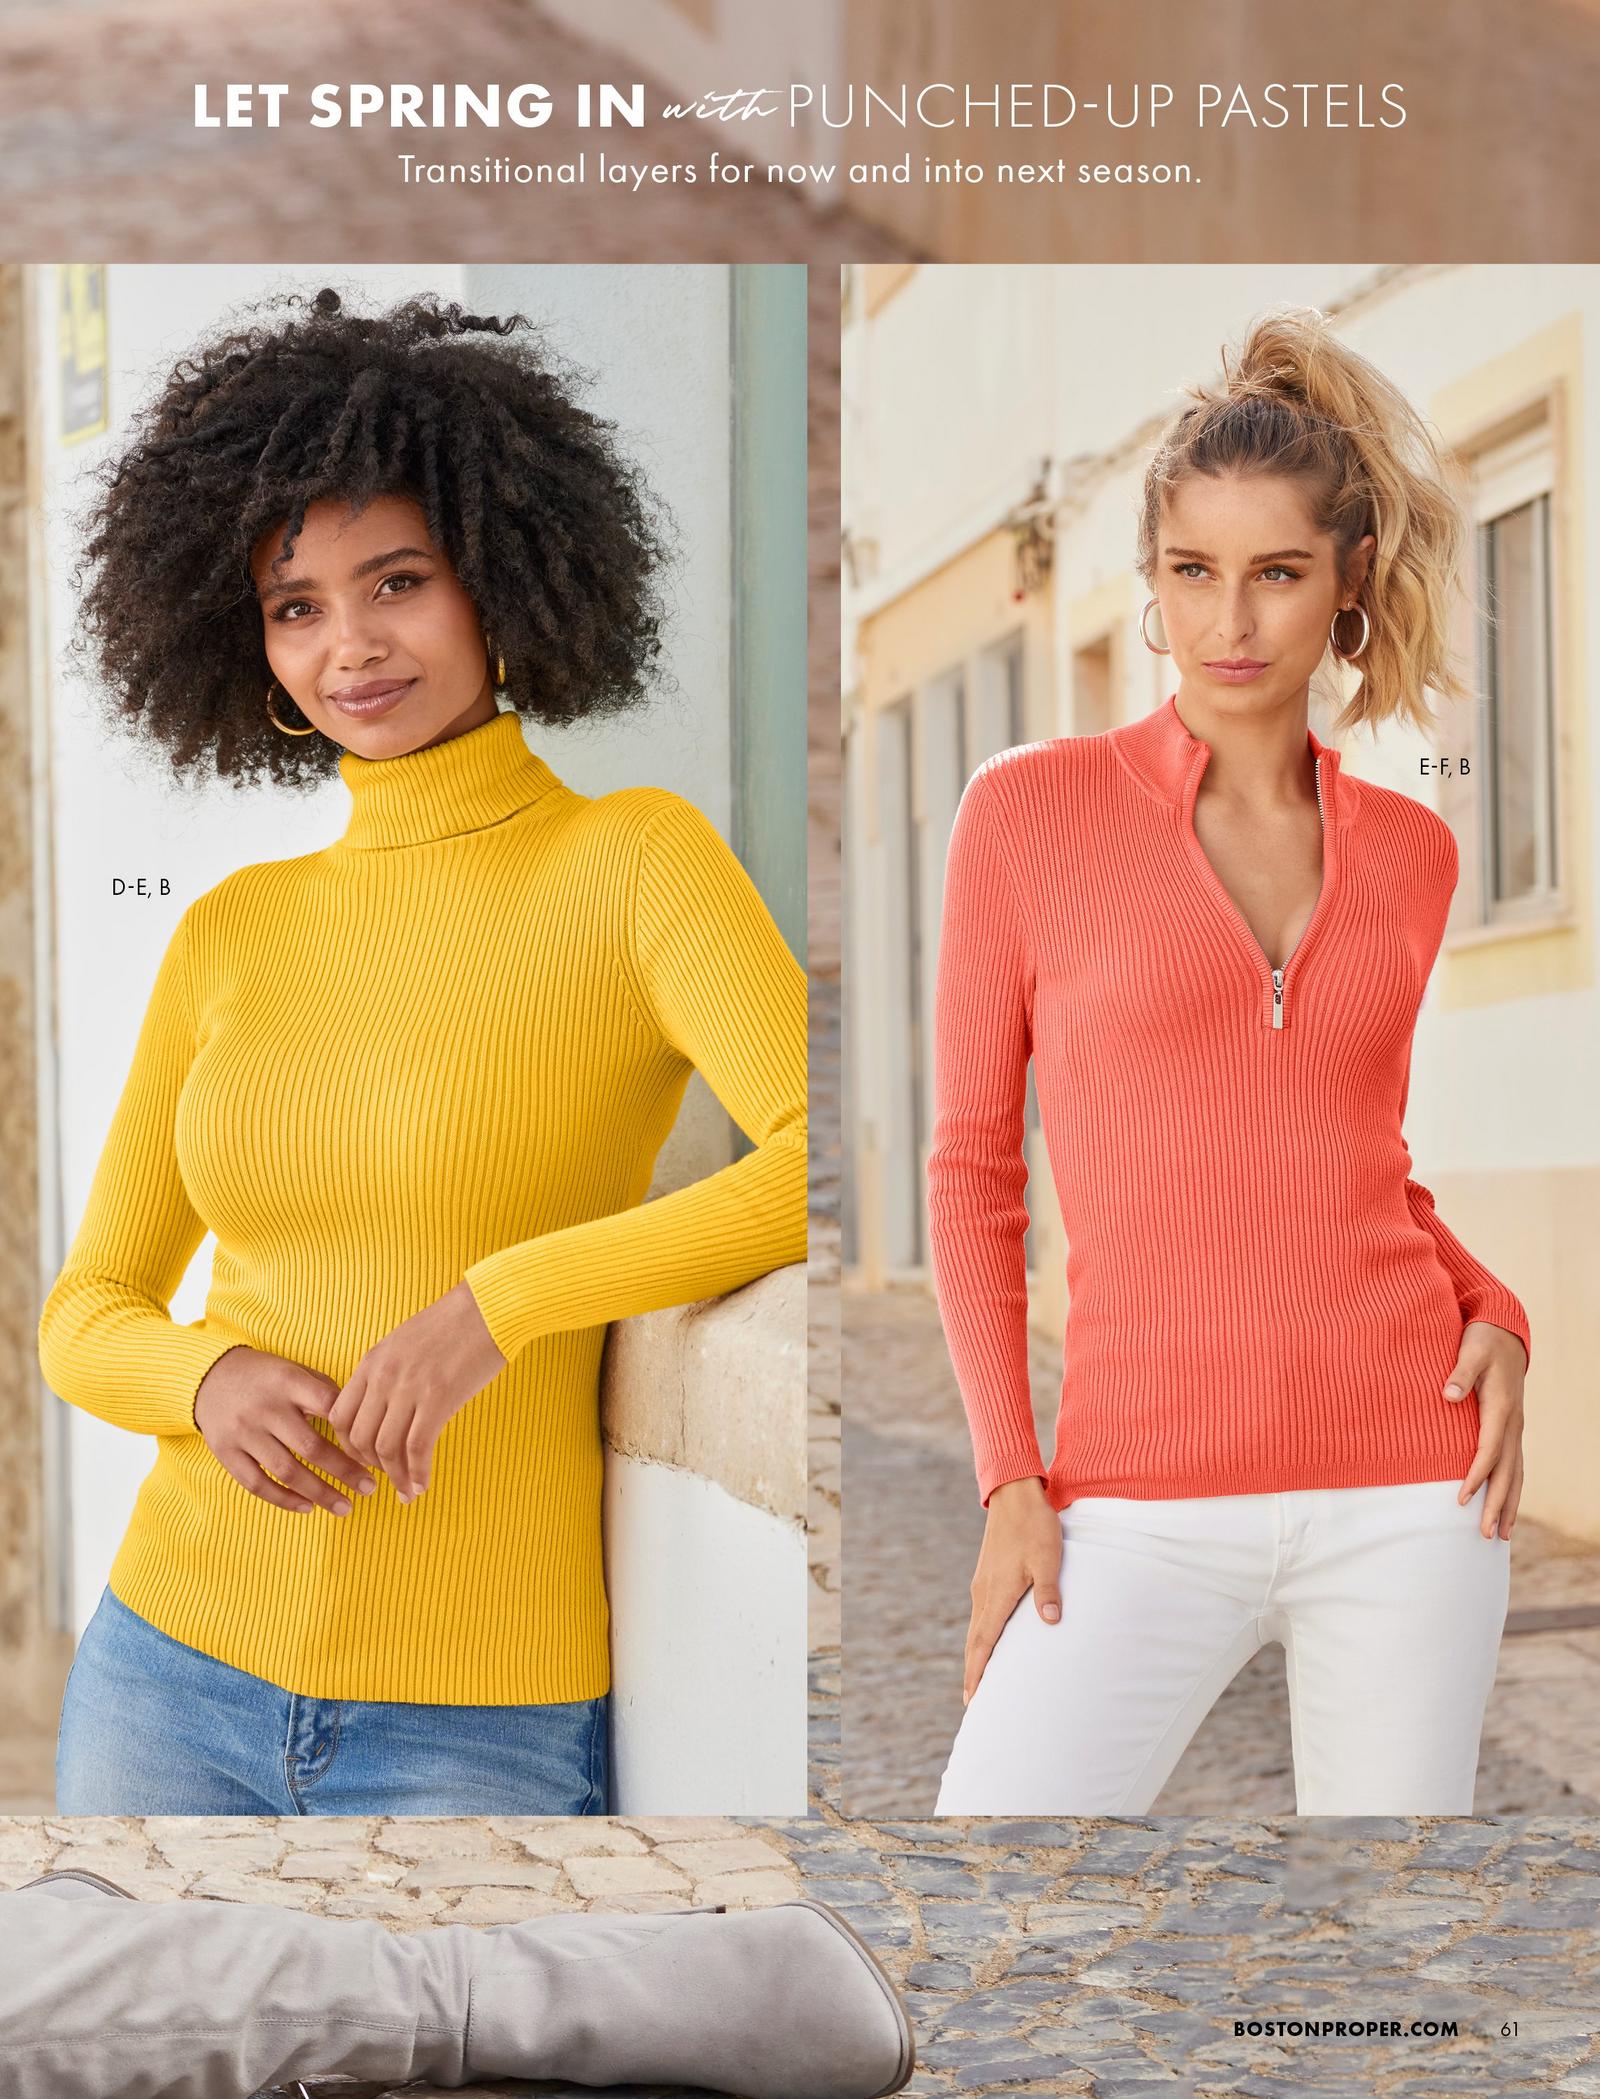 left model wearing a yellow ribbed turtleneck sweater, gold hoop earrings, and jeans. right model wearing a coral ribbed half-zip sweater, gold hoop earrings, and white jeans.